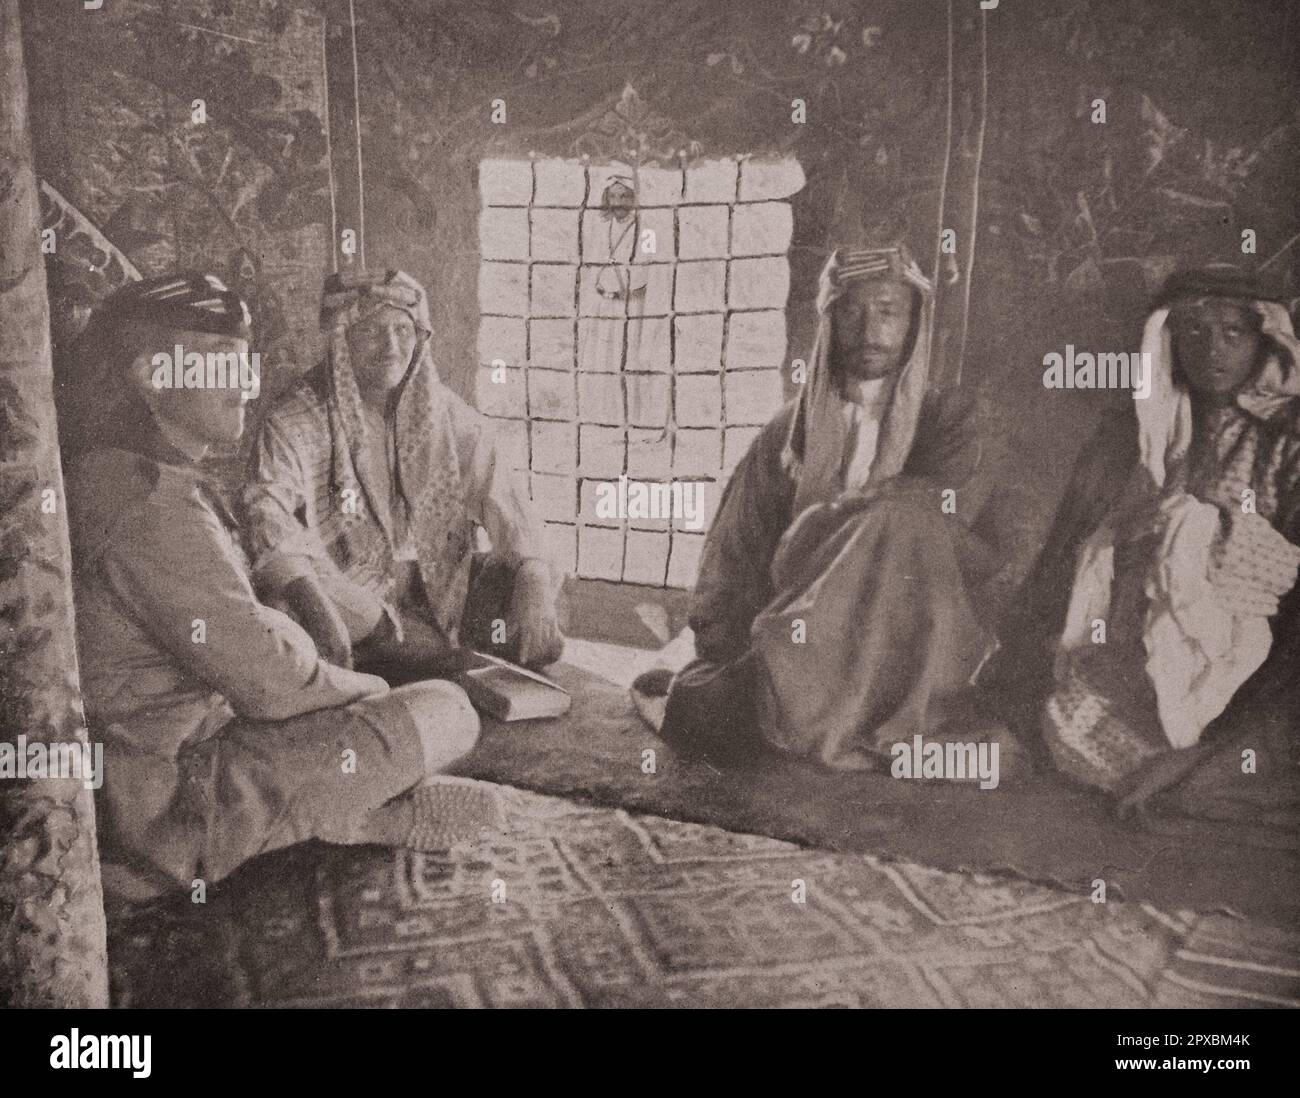 World War I. Middle East. In the Hejaz. Emir Faisal.  One of the sons of the king of Hejaz: the emir Faisal in his tent.  Faisal I bin Al-Hussein bin Ali Al-Hashemi (1885–1933) was King of the Arab Kingdom of Syria or Greater Syria in 1920, and was King of Iraq from 23 August 1921 until his death. He was the third son of Hussein bin Ali, the Grand Emir and Sharif of Mecca, who was proclaimed as King of the Arabs in June 1916.  He was a 38th-generation direct descendant of Muhammad, as he belonged to the Hashemite family. Stock Photo